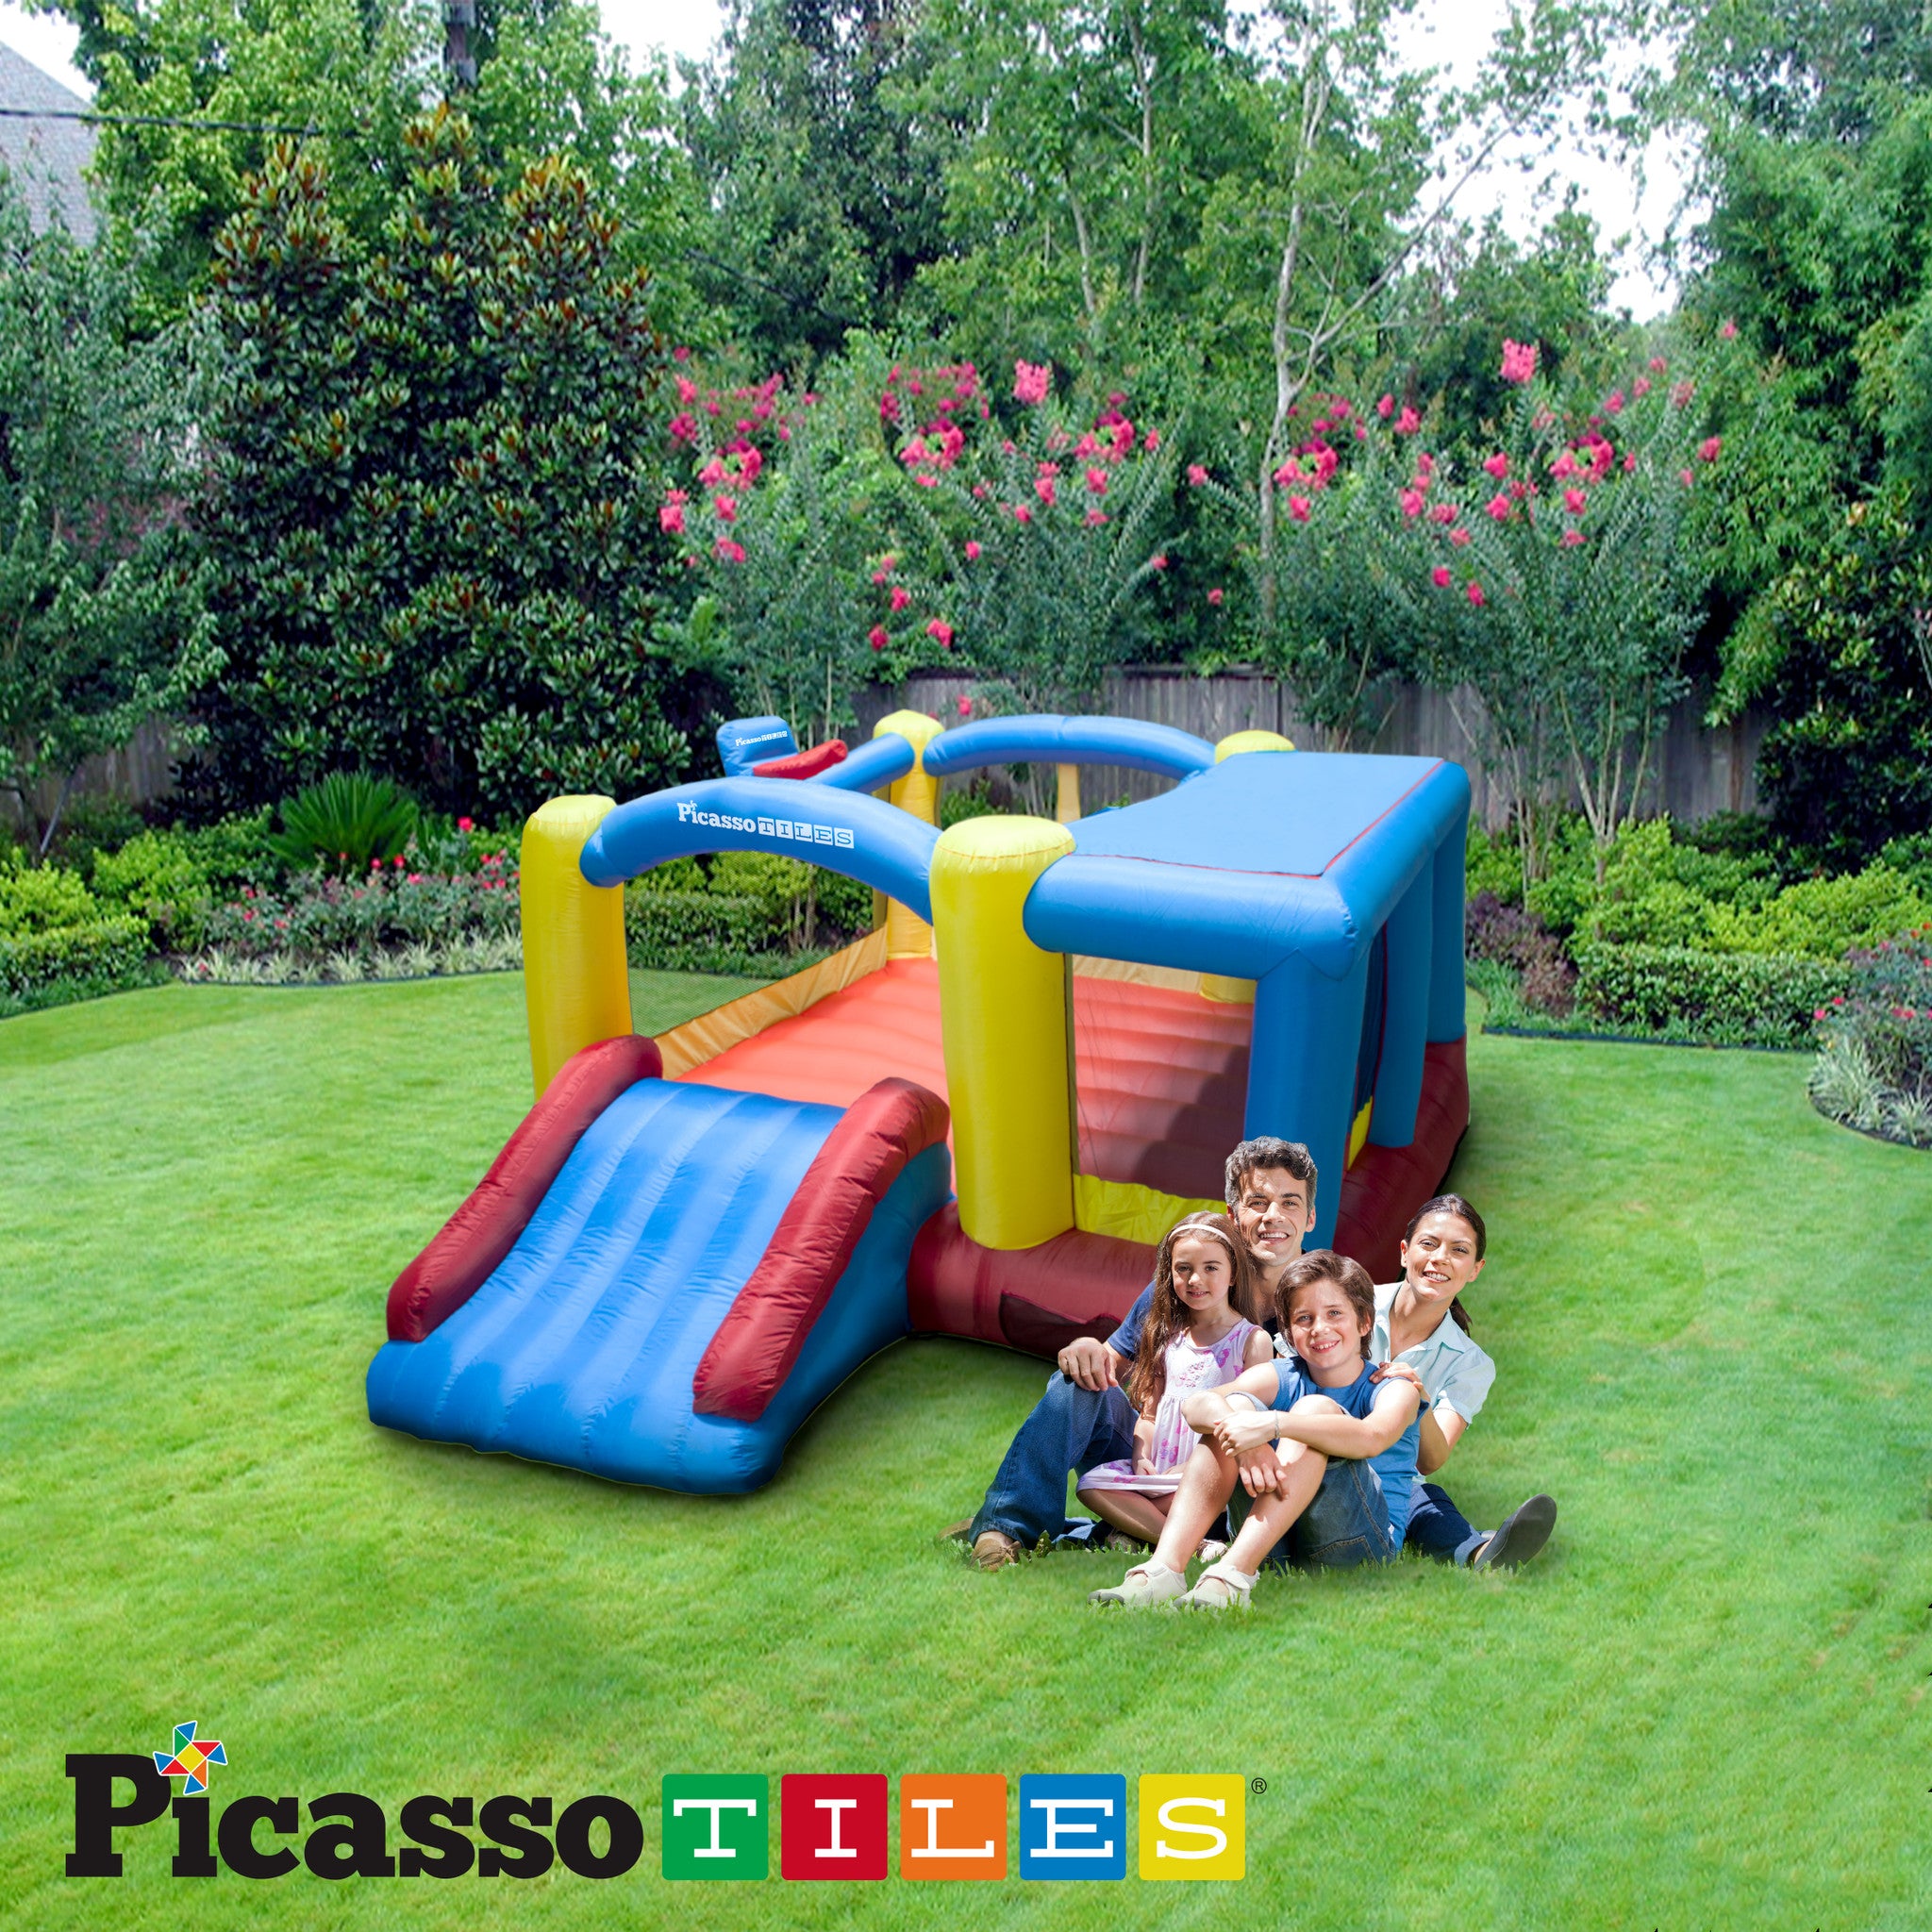 PicassoTiles KC102 12x10 Foot Inflatable Bouncer Jumping Bouncing House, Jump Slide and Dunk Playhouse Featuring Basketball Dunking Rim, 4 Sports Balls, Extended Slider, Full Size Entry, Quick Setup